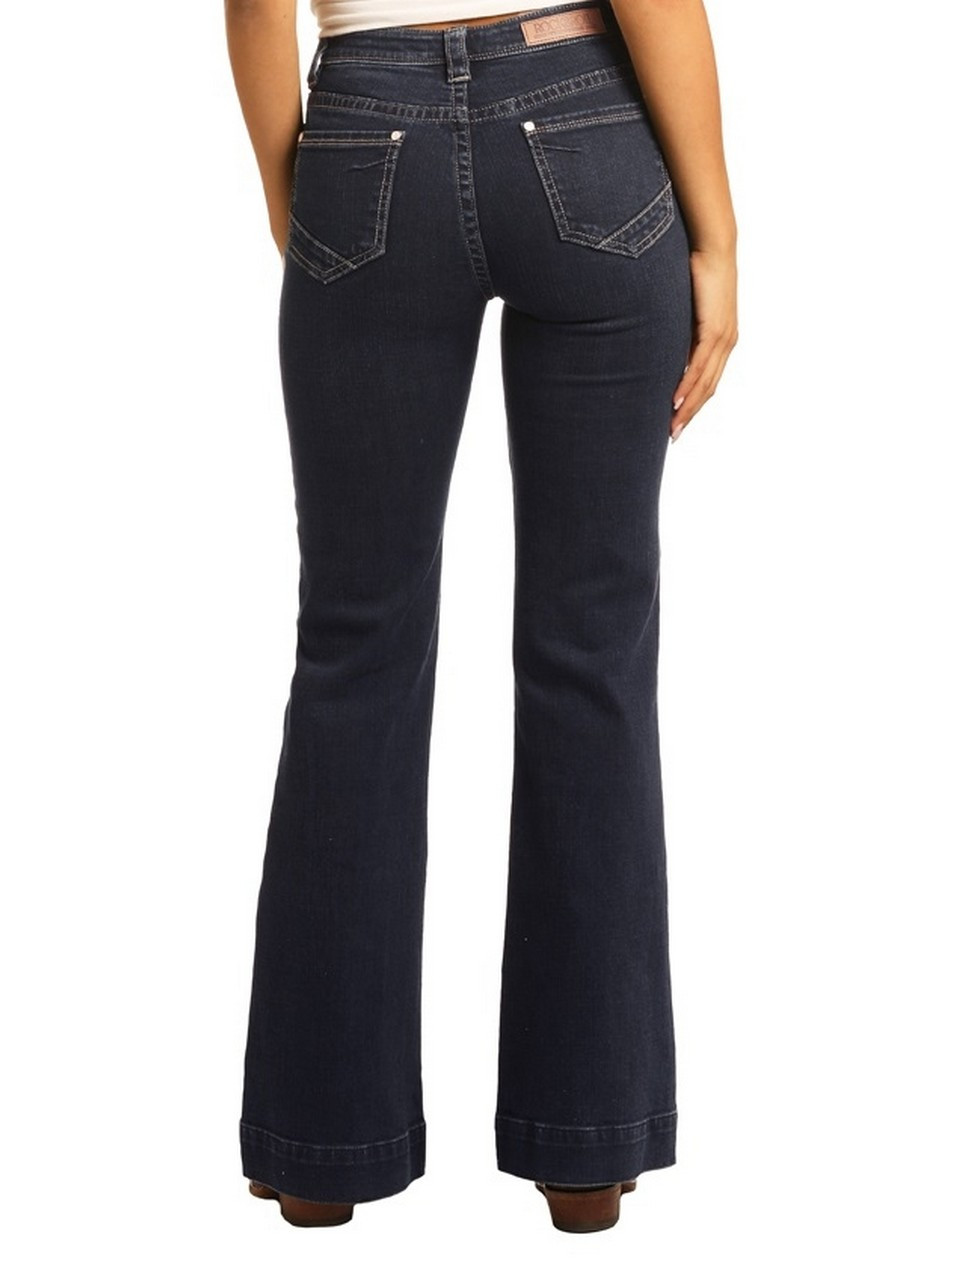 cowgirl trouser jeans